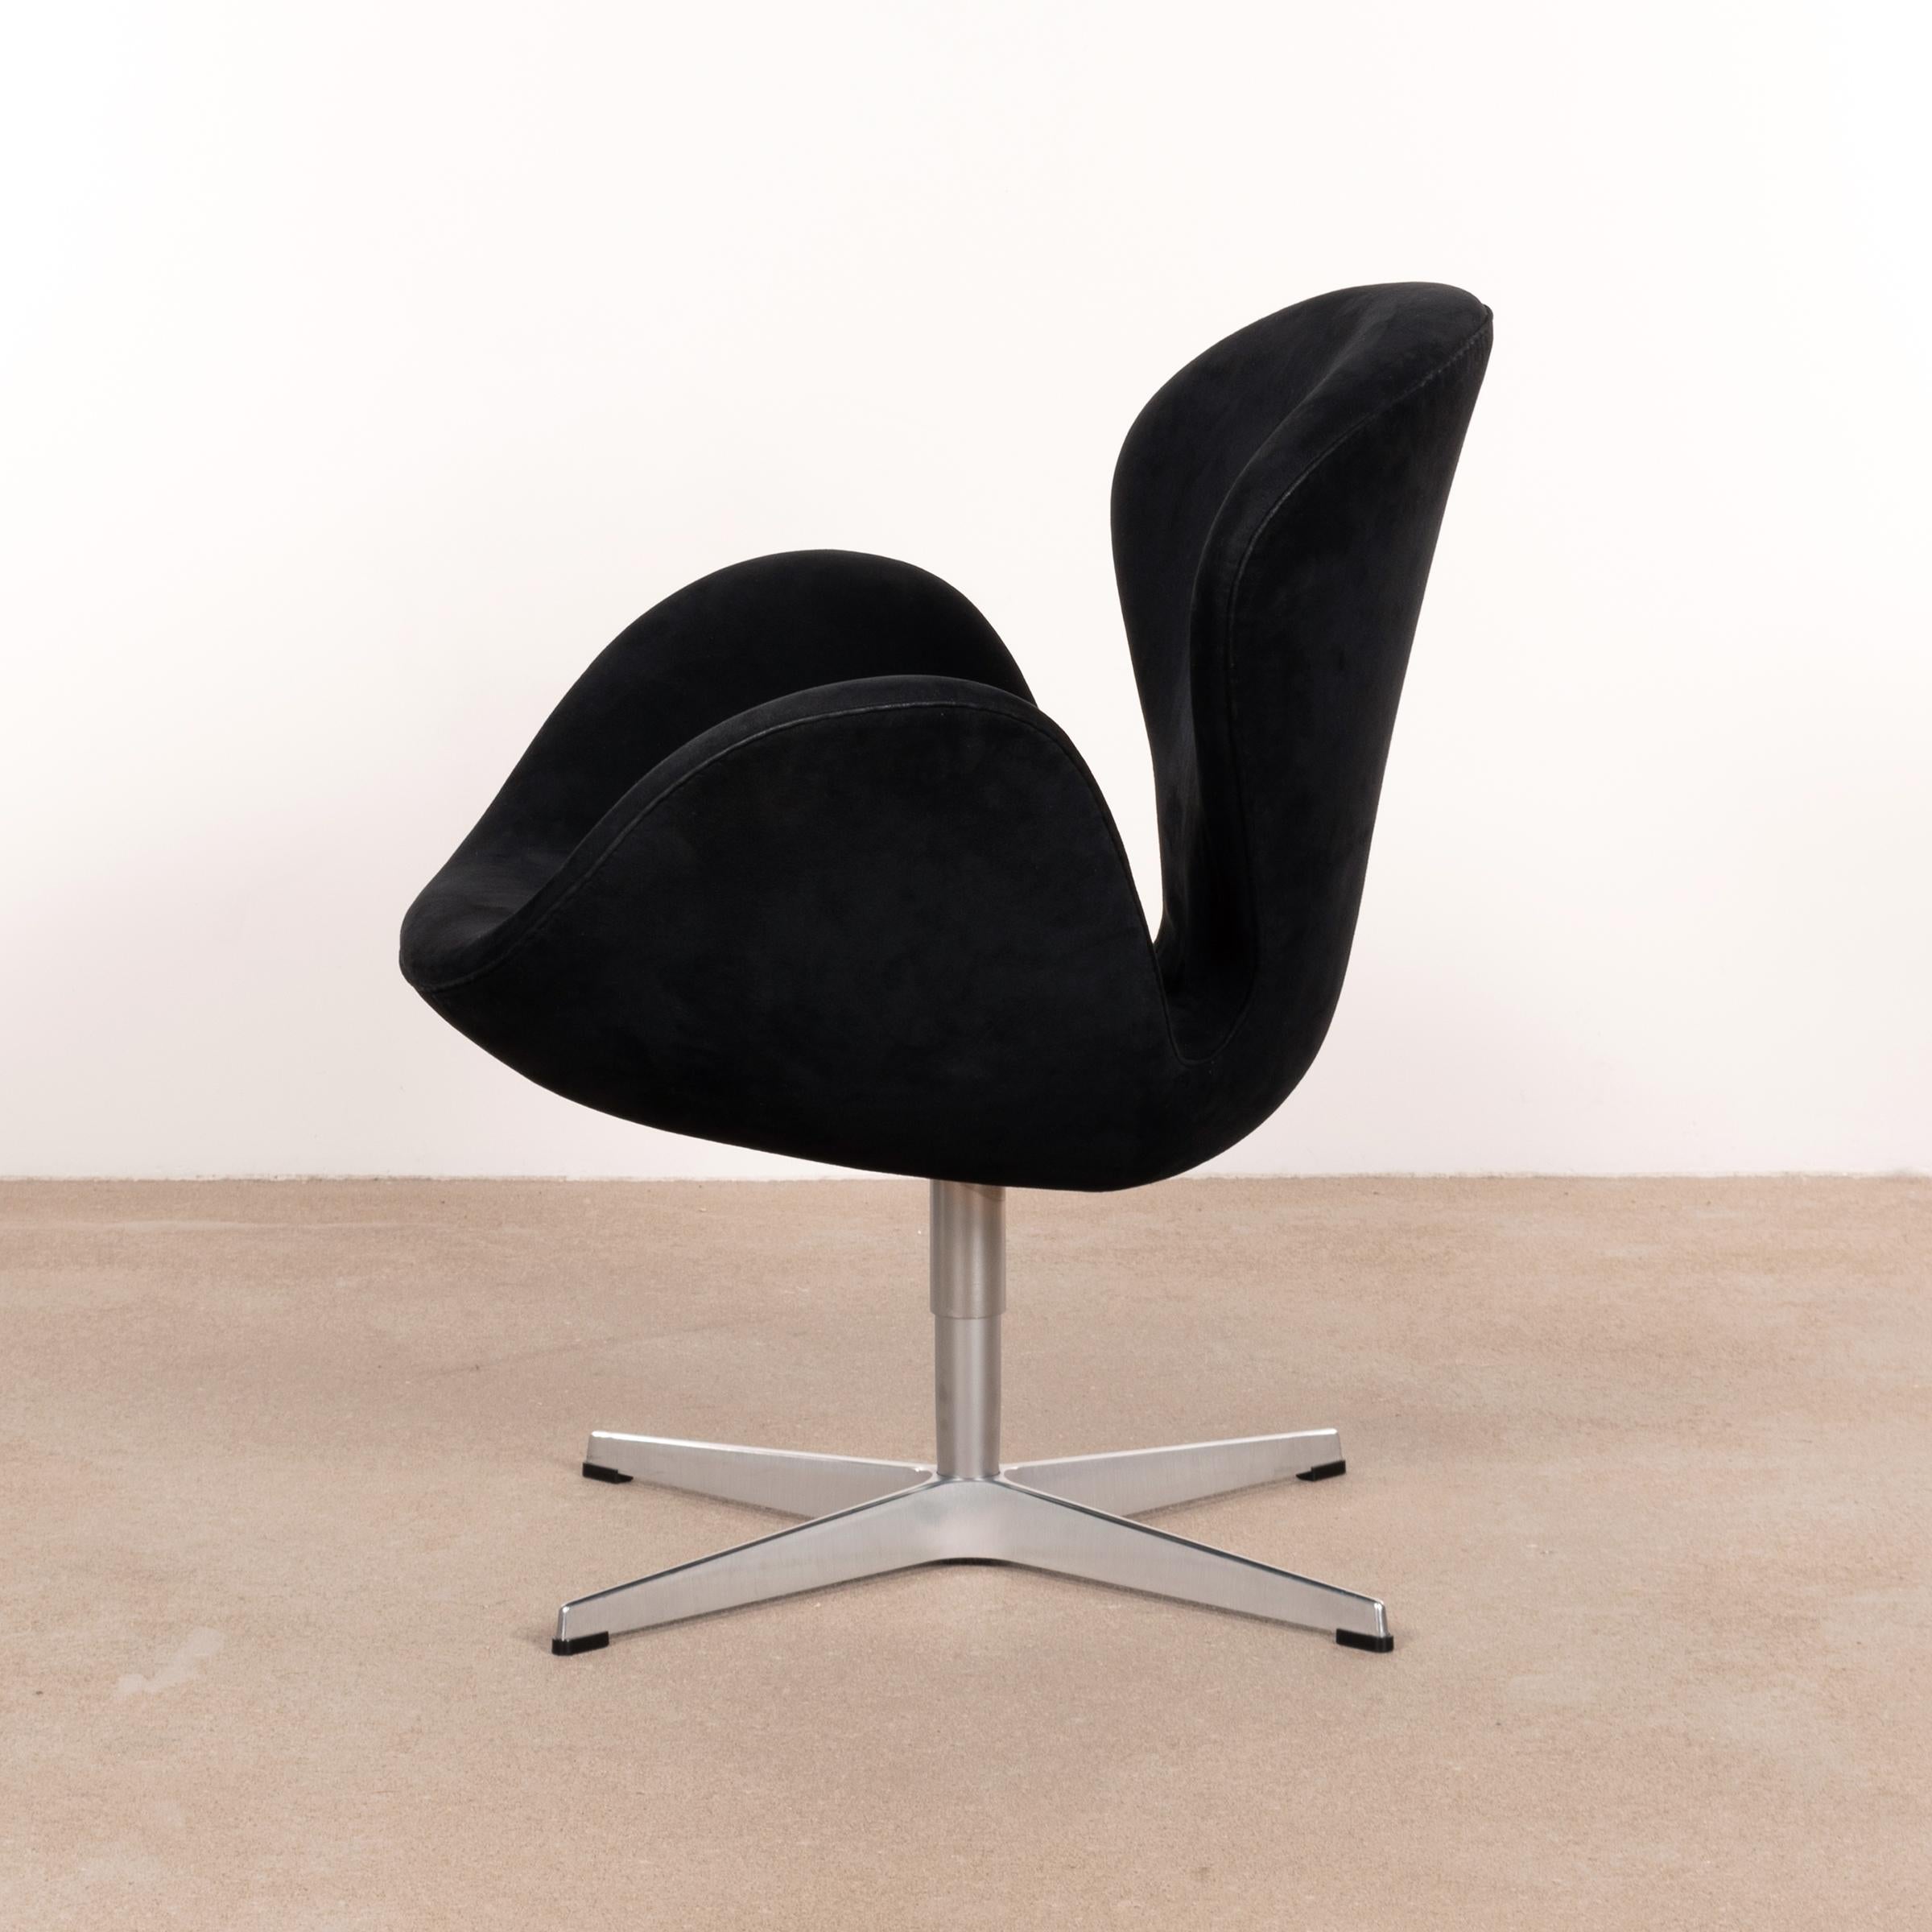 Iconic Swan chair designed by Arne Jacobsen for the lobby and lounge areas at the SAS Royal Hotel in Copenhagen 1958. This Swan Chair is upholstered in original black Alcantara and produced in 2004 (signed). Very good condition with only minor